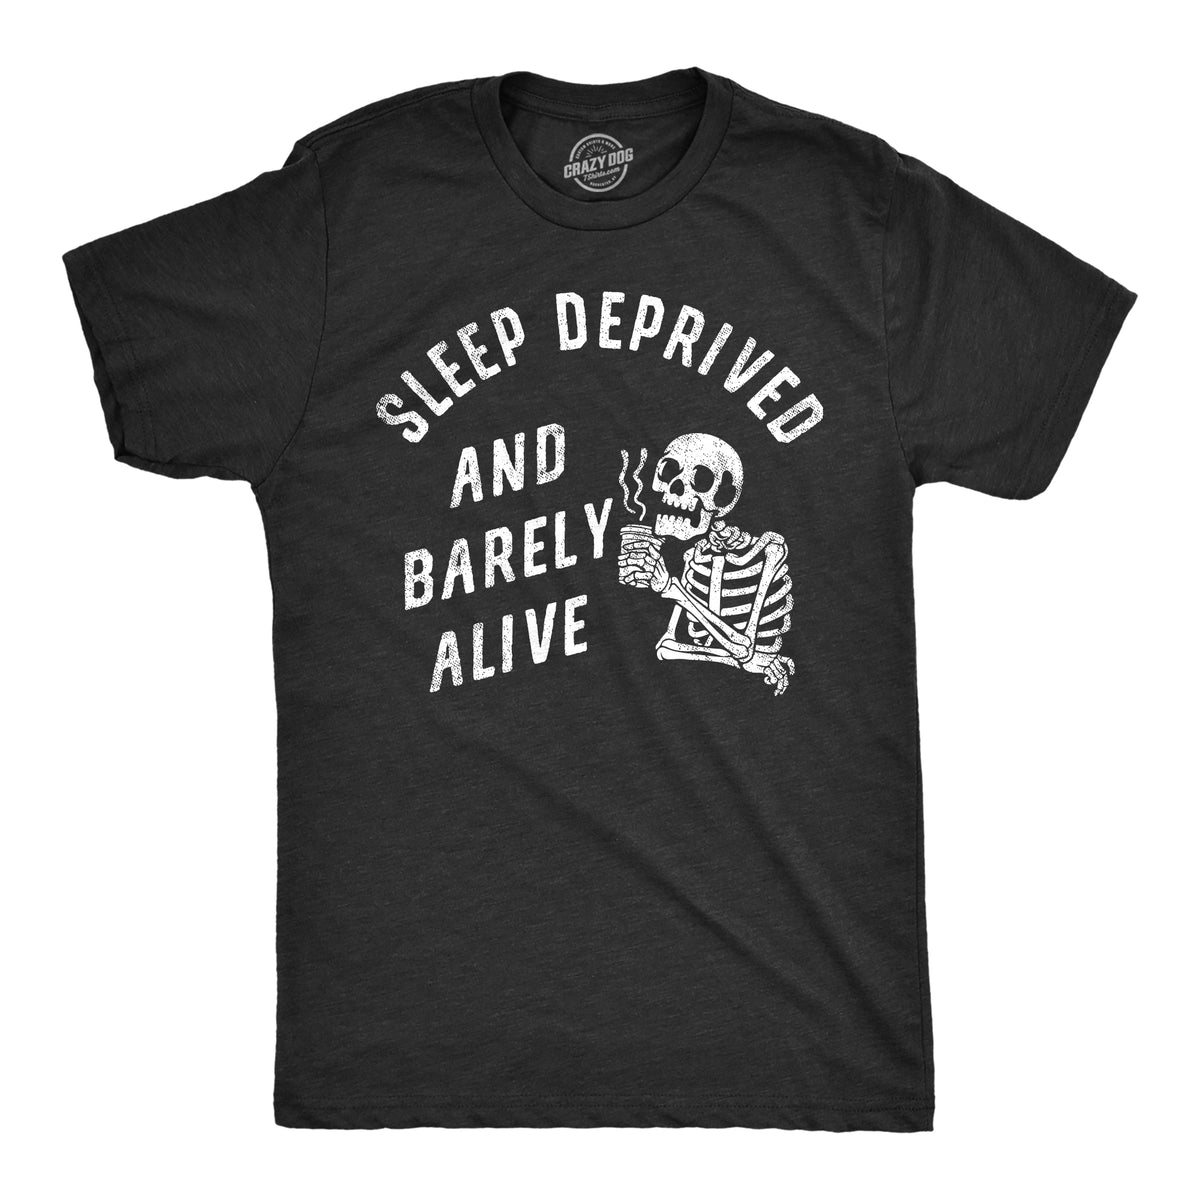 Funny Heather Black - DEPRIVED Sleep Deprived And Barely Alive Mens T Shirt Nerdy sarcastic Tee